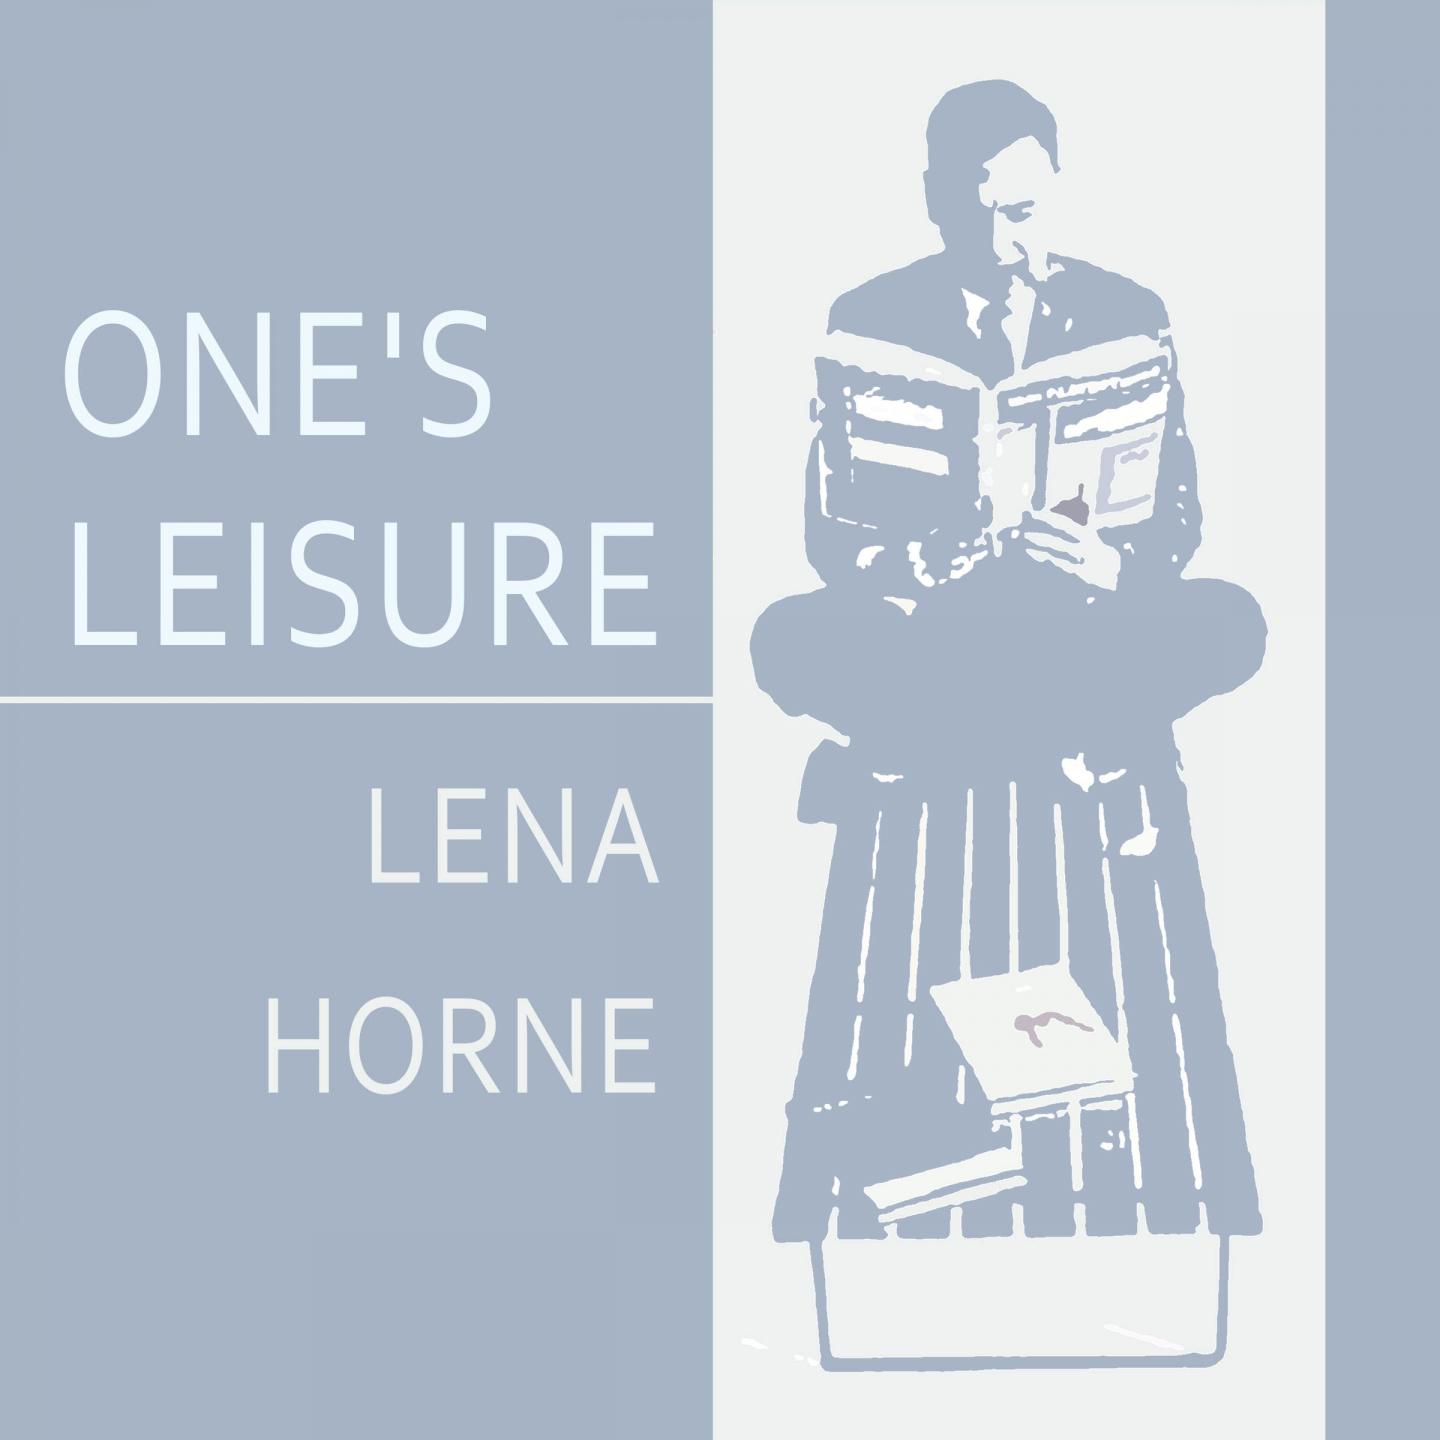 Once Leisure